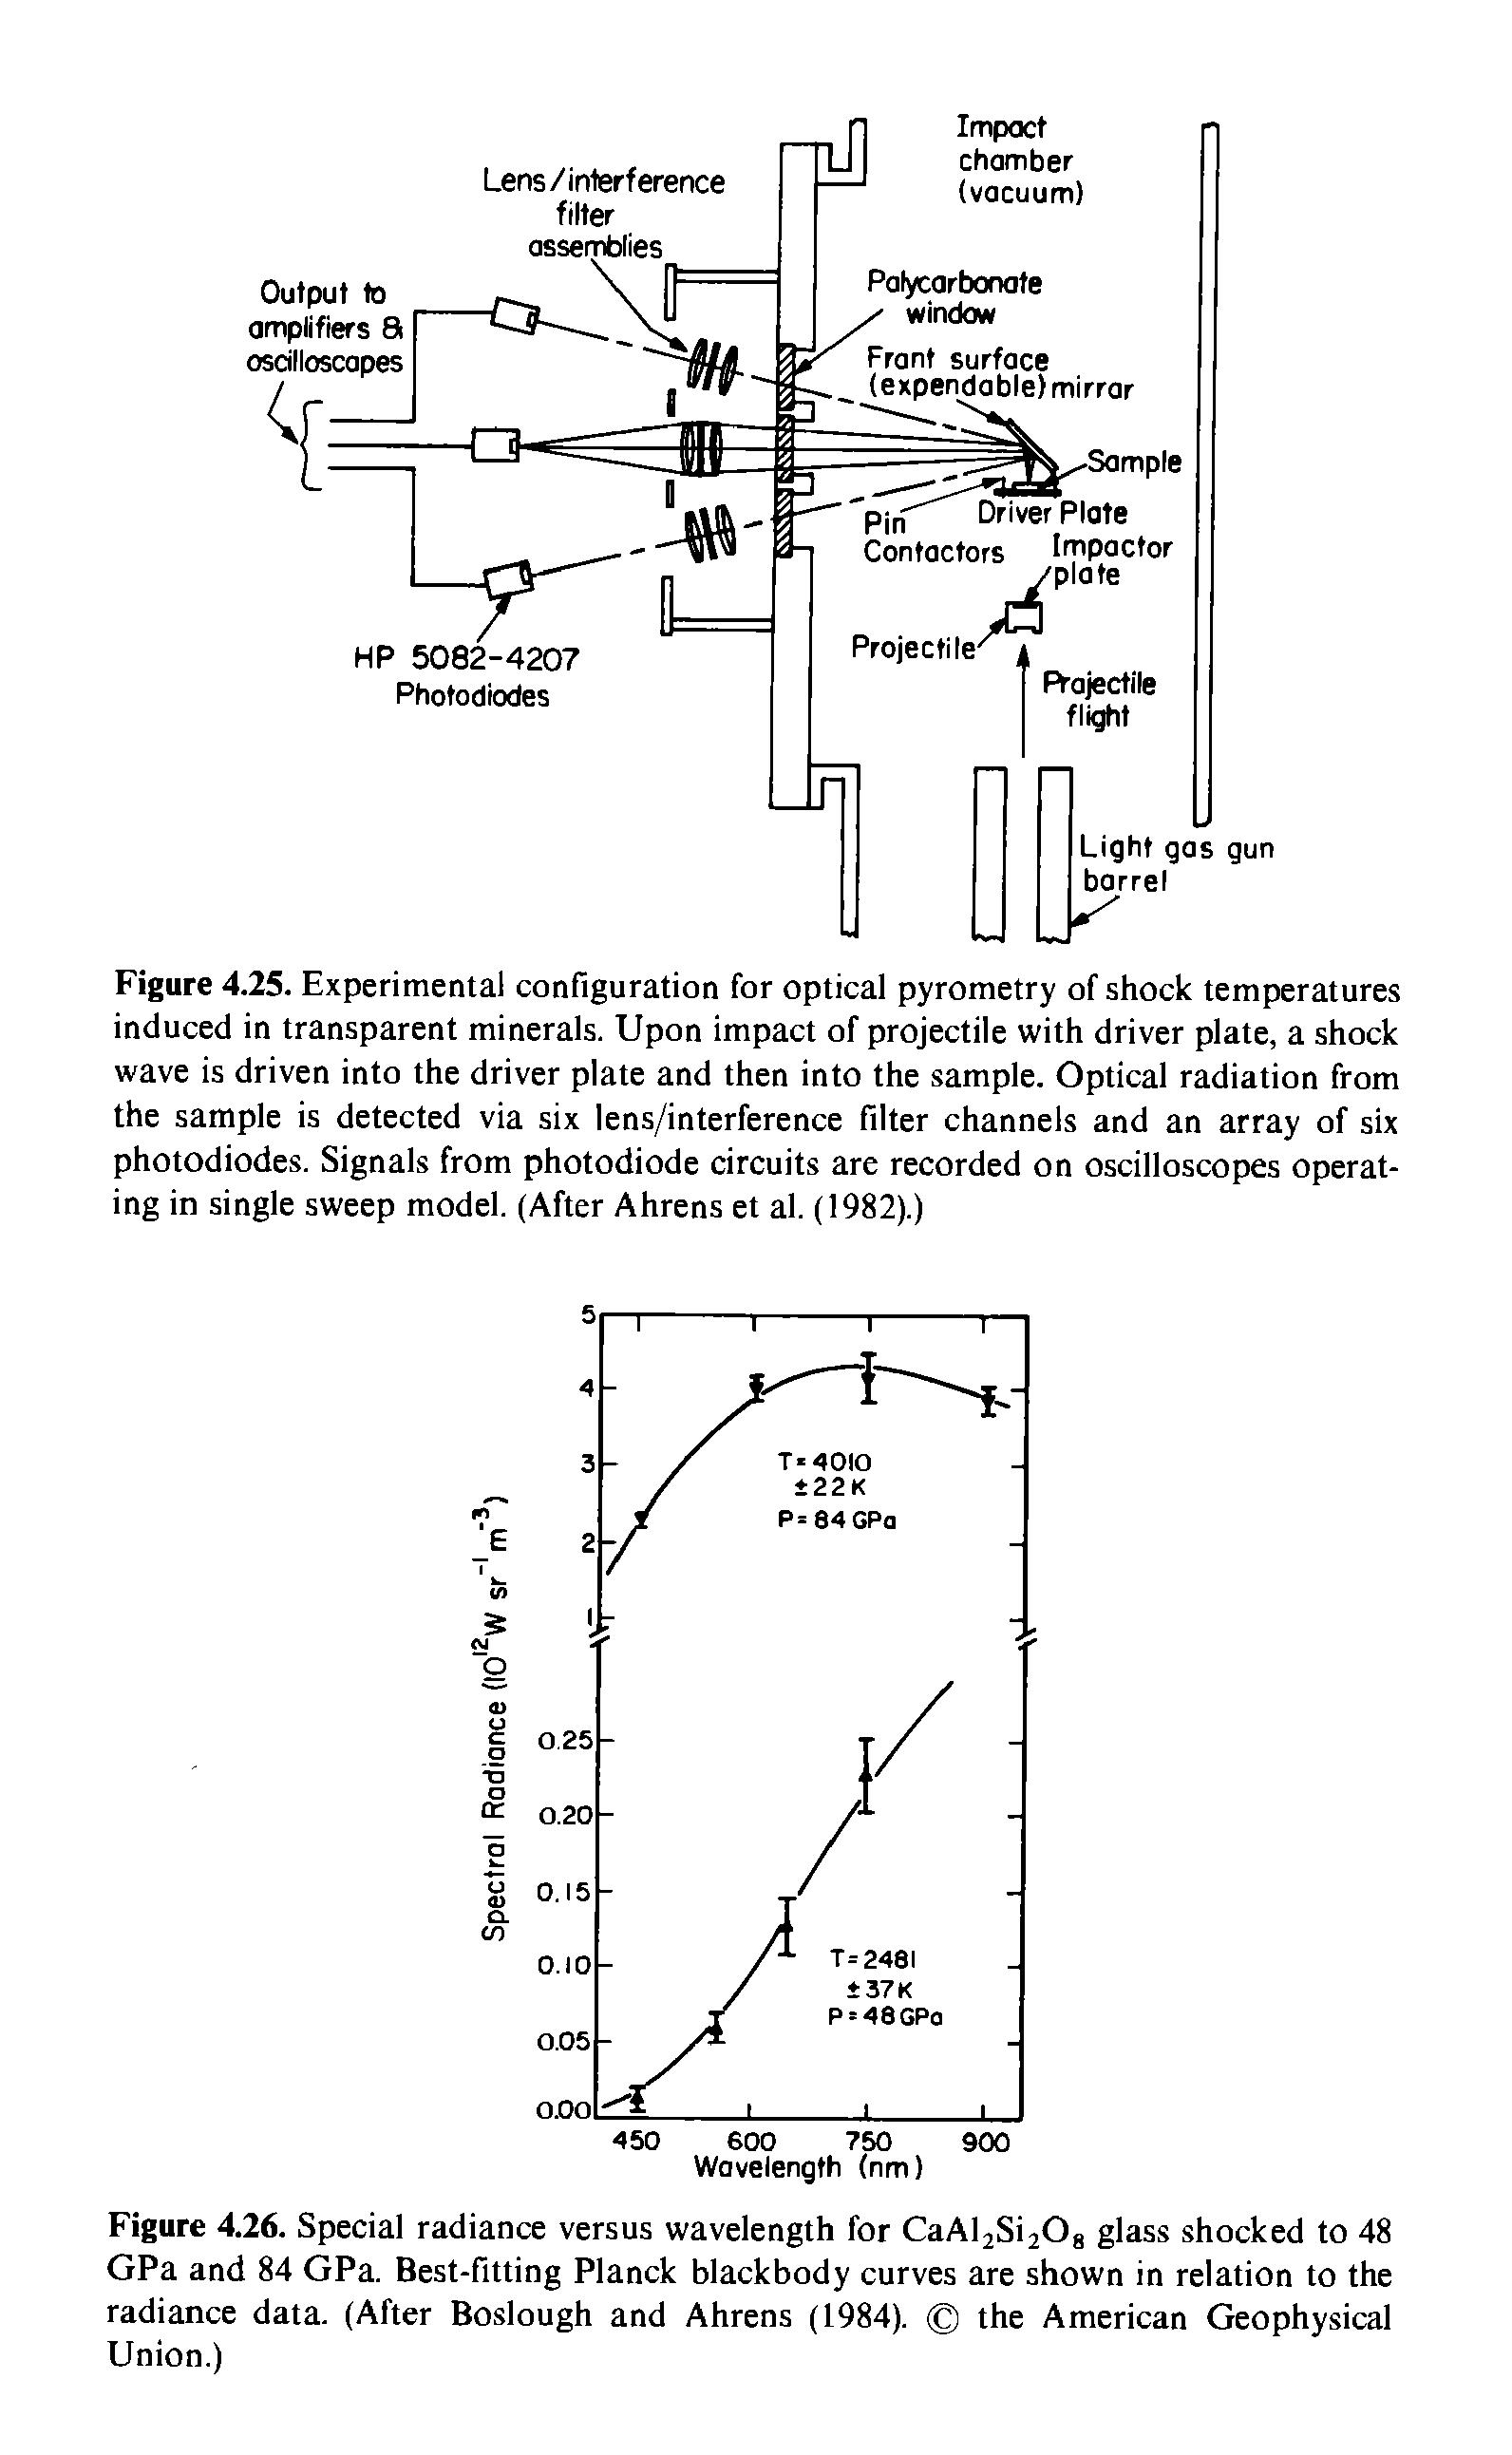 Figure 4.25. Experimental configuration for optical pyrometry of shock temperatures induced in transparent minerals. Upon impact of projectile with driver plate, a shock wave is driven into the driver plate and then into the sample. Optical radiation from the sample is detected via six lens/interference filter channels and an array of six photodiodes. Signals from photodiode circuits are recorded on oscilloscopes operating in single sweep model. (After Ahrens et al. (1982).)...